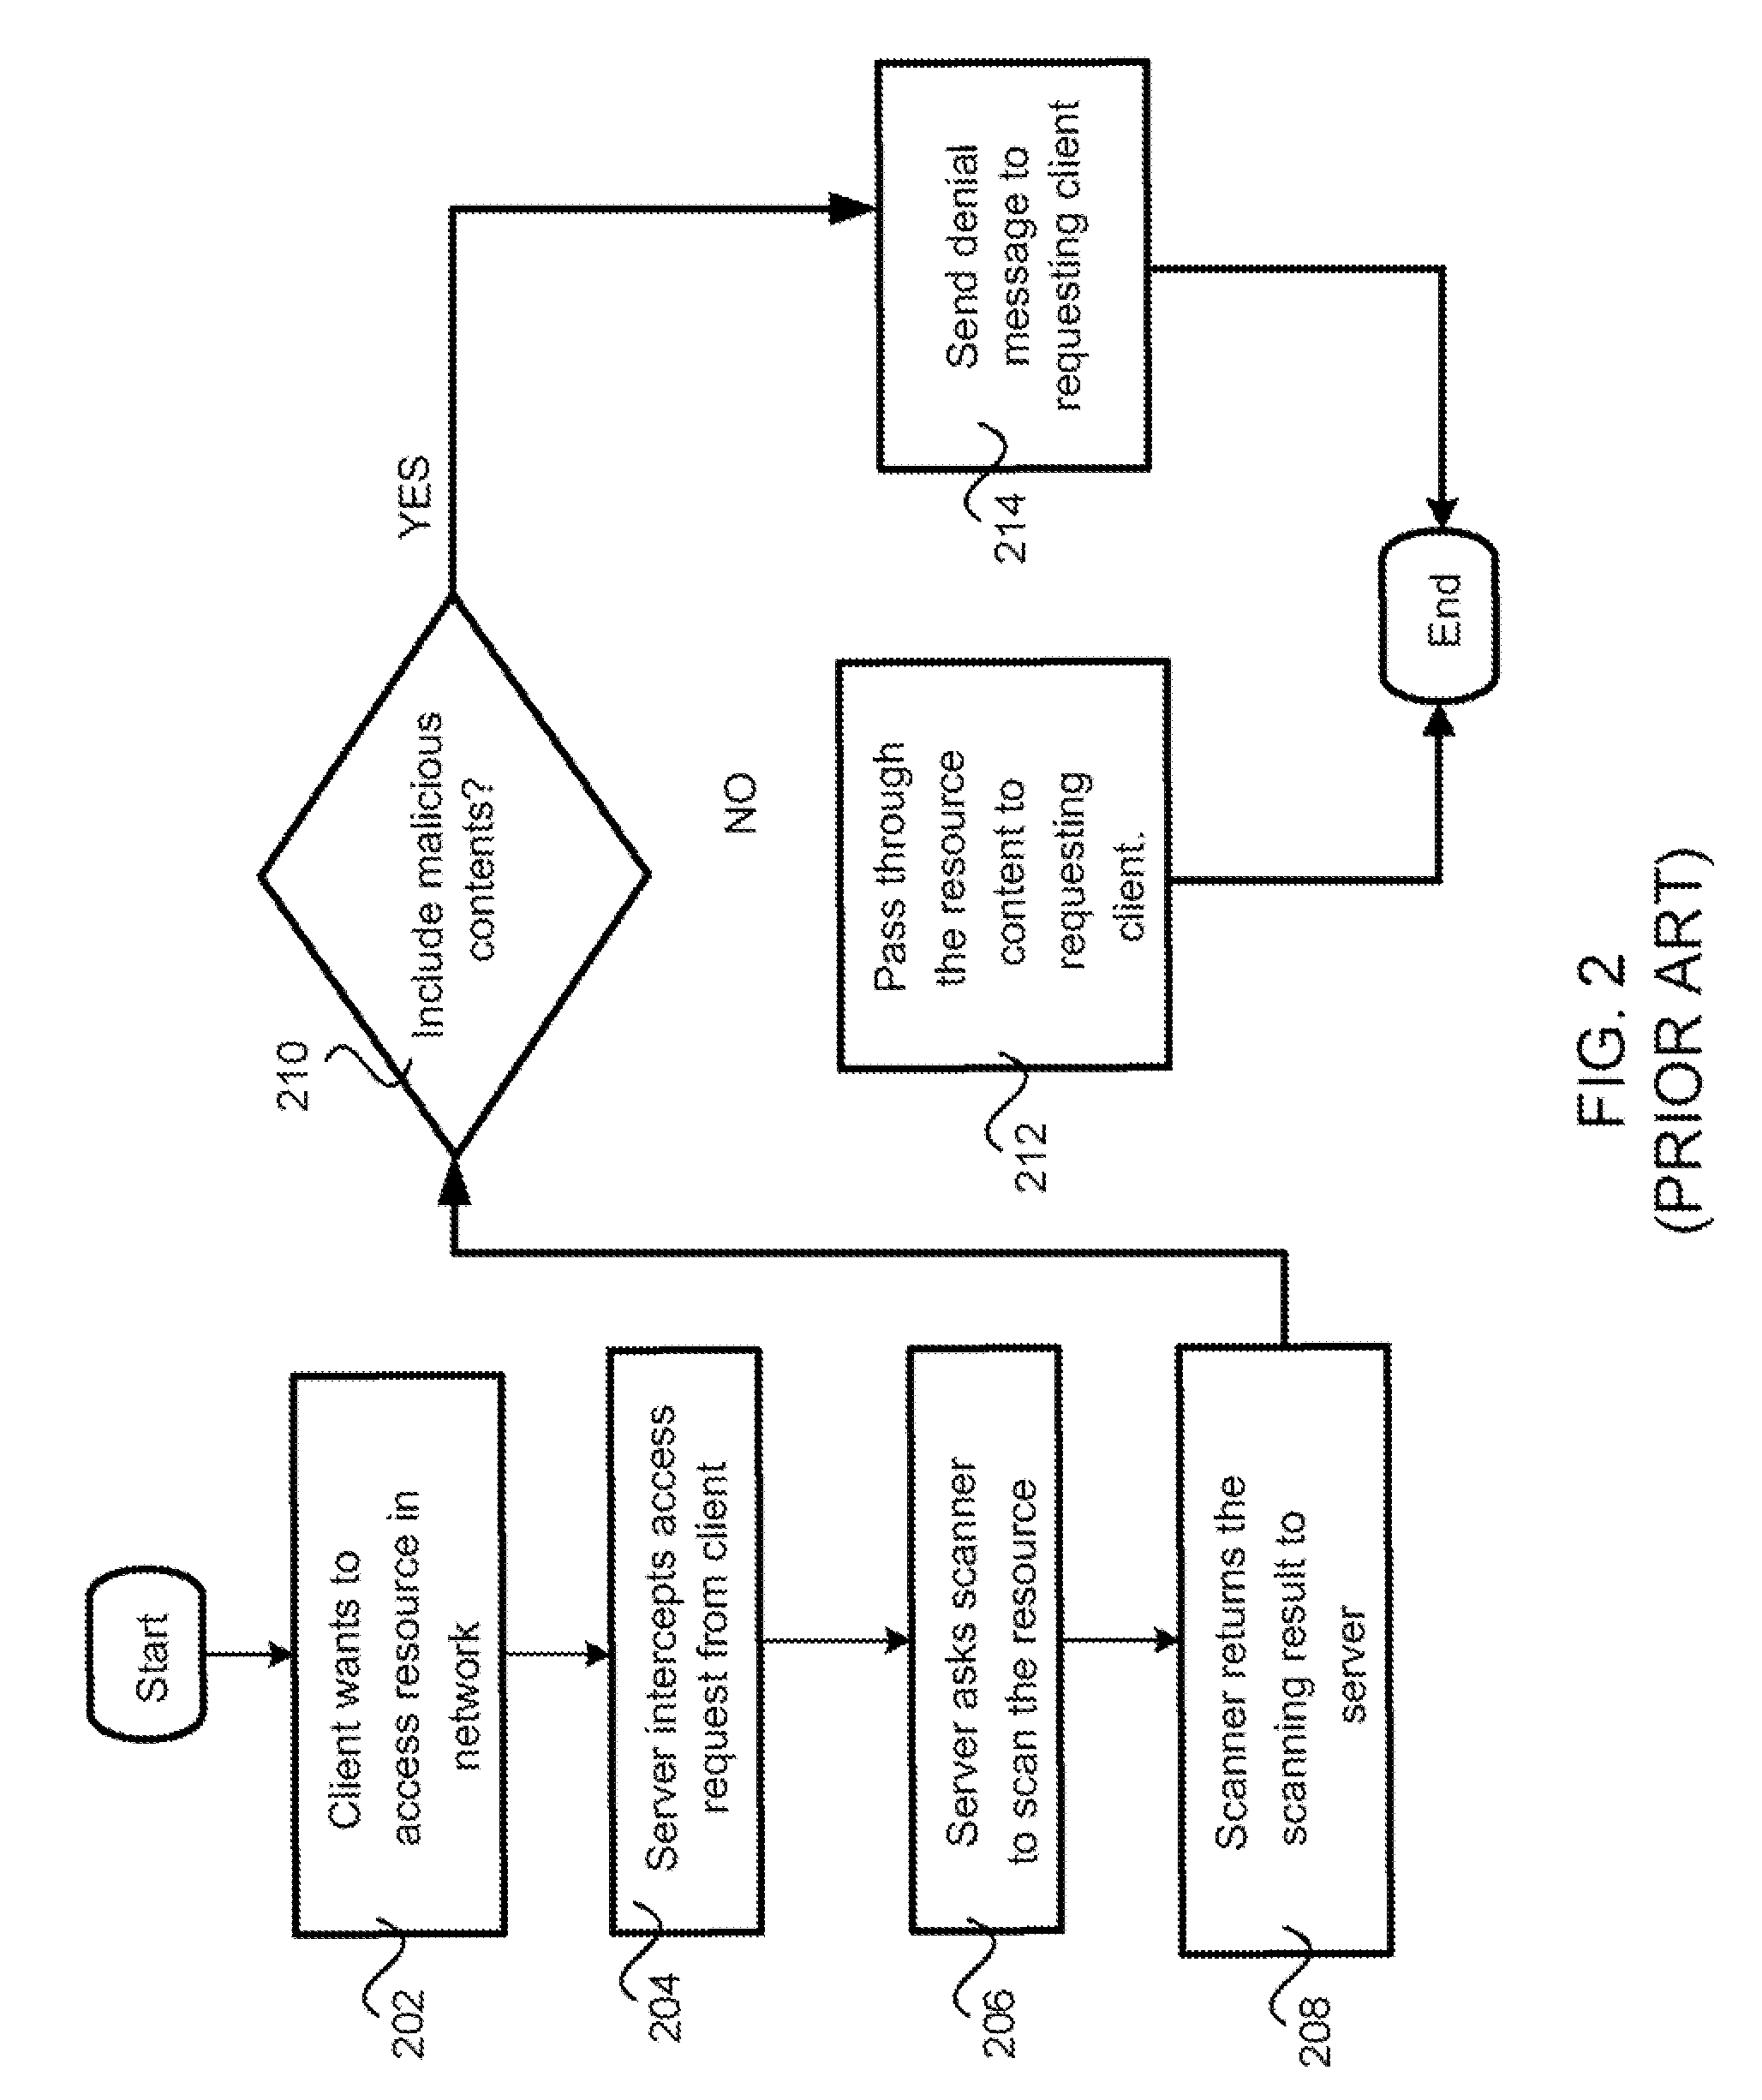 Scheduled gateway scanning arrangement and methods thereof